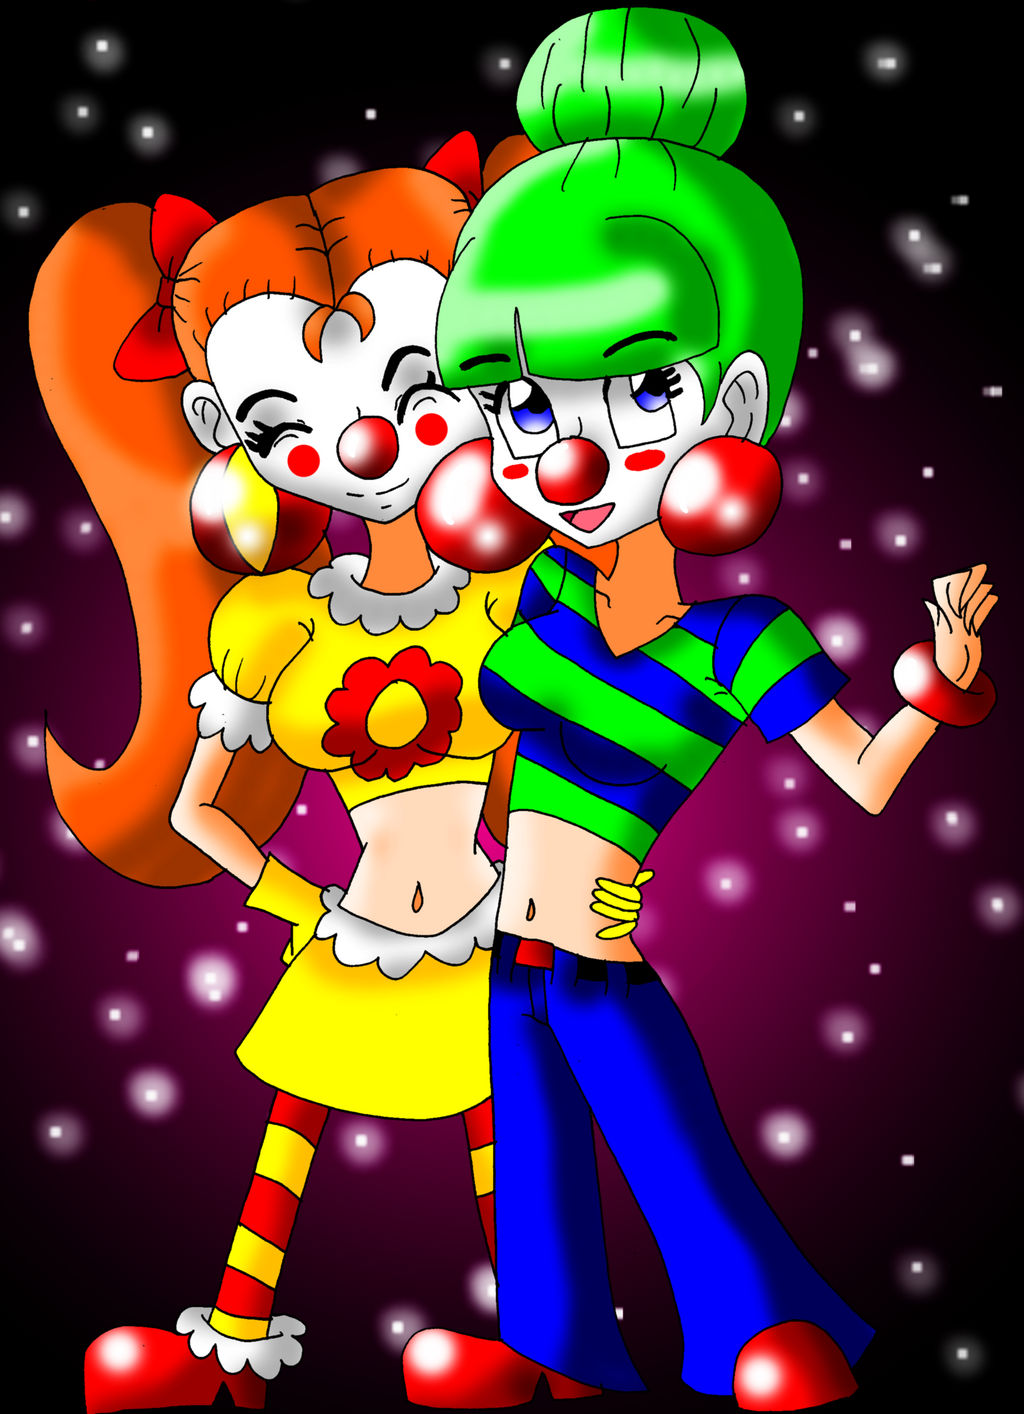 What the?! The Rainbow Friends?! by Clown-Buddy on Newgrounds